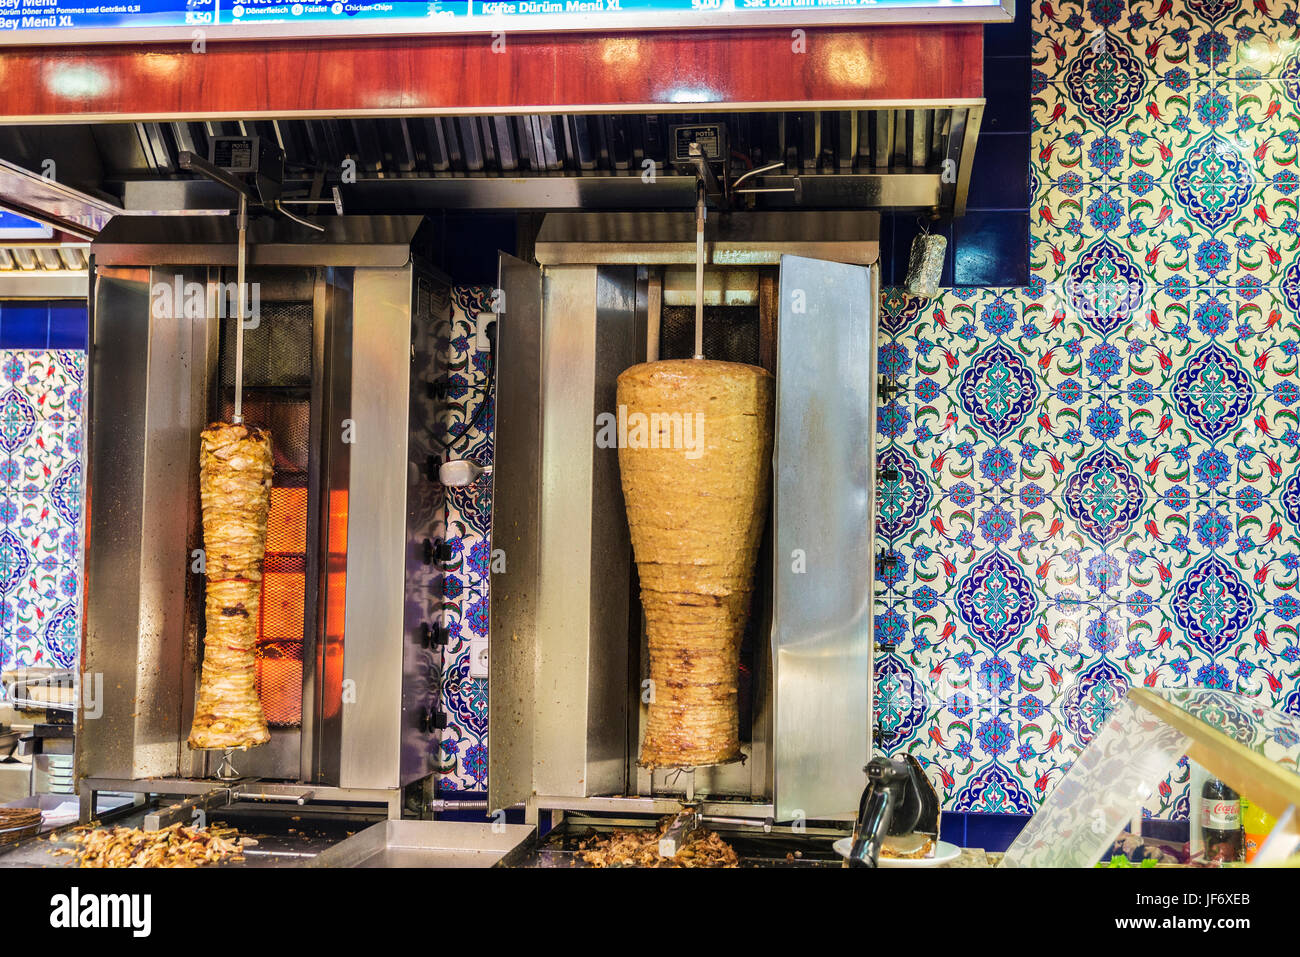 Berlin, Germany - April 12, 2017: Kitchen of a Doner kebap with rolls of mutton or chicken in Berlin, Germany Stock Photo